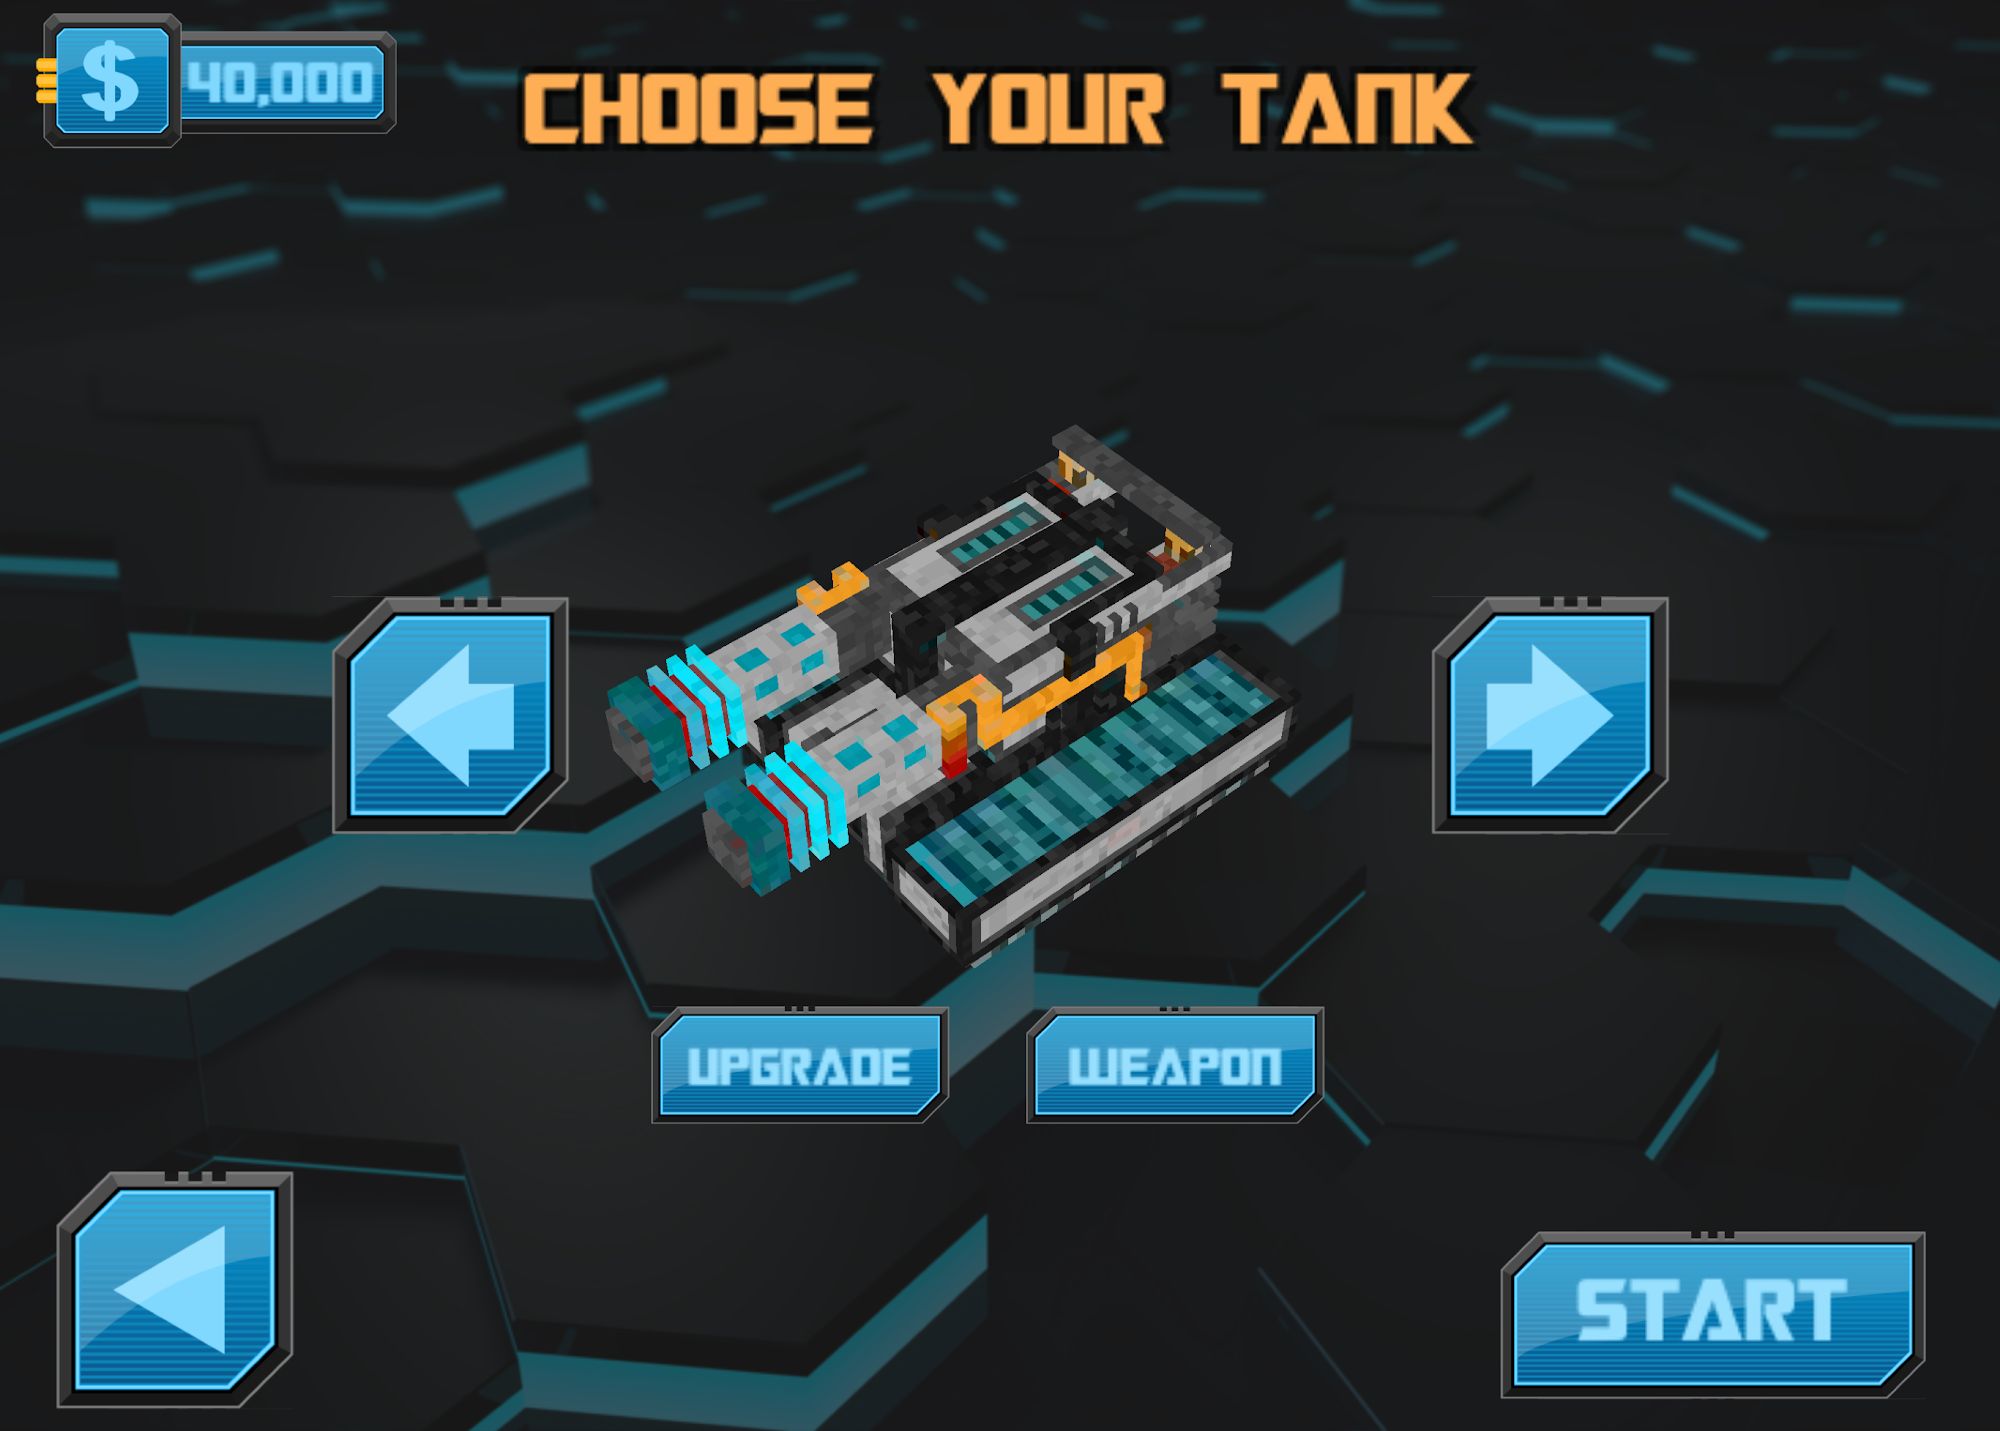 Power Tanks 3D - Cyberpunk Shooter War Game for Android